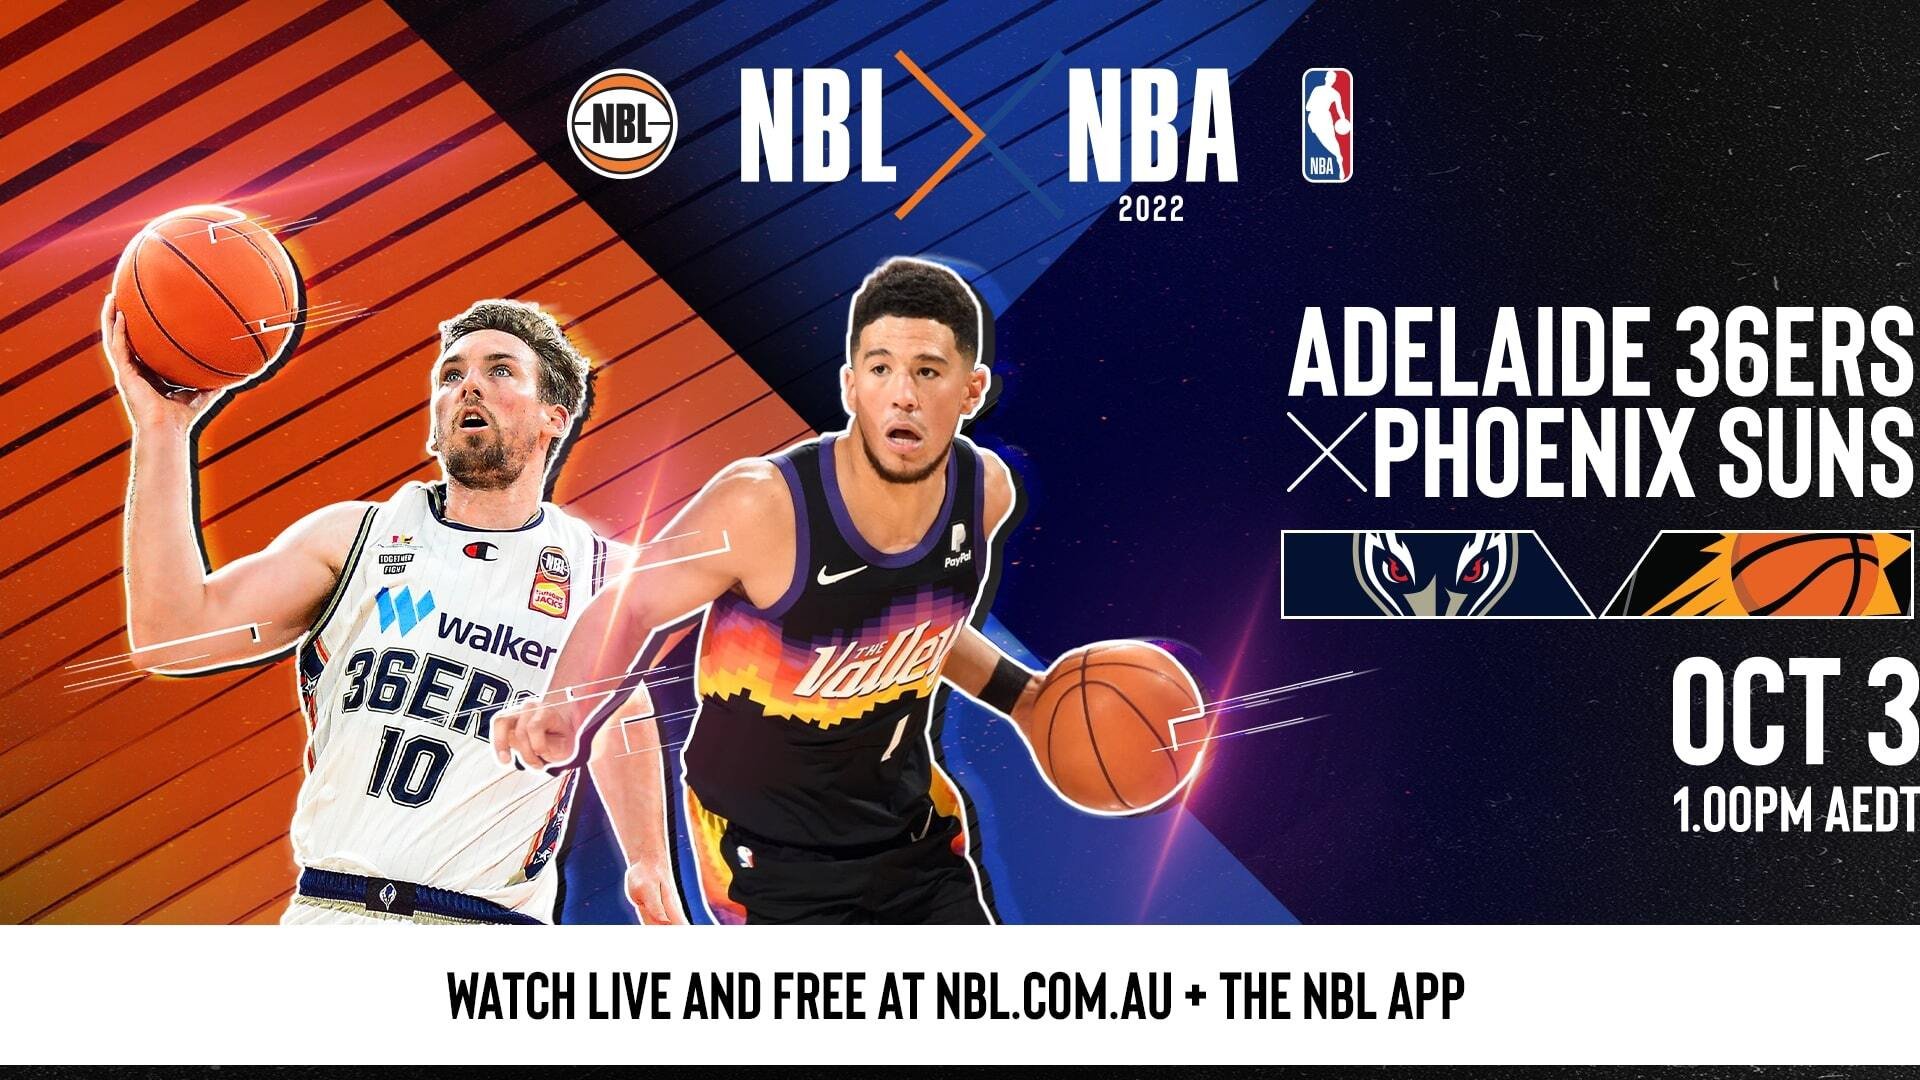 How to watch the NBL x NBA games